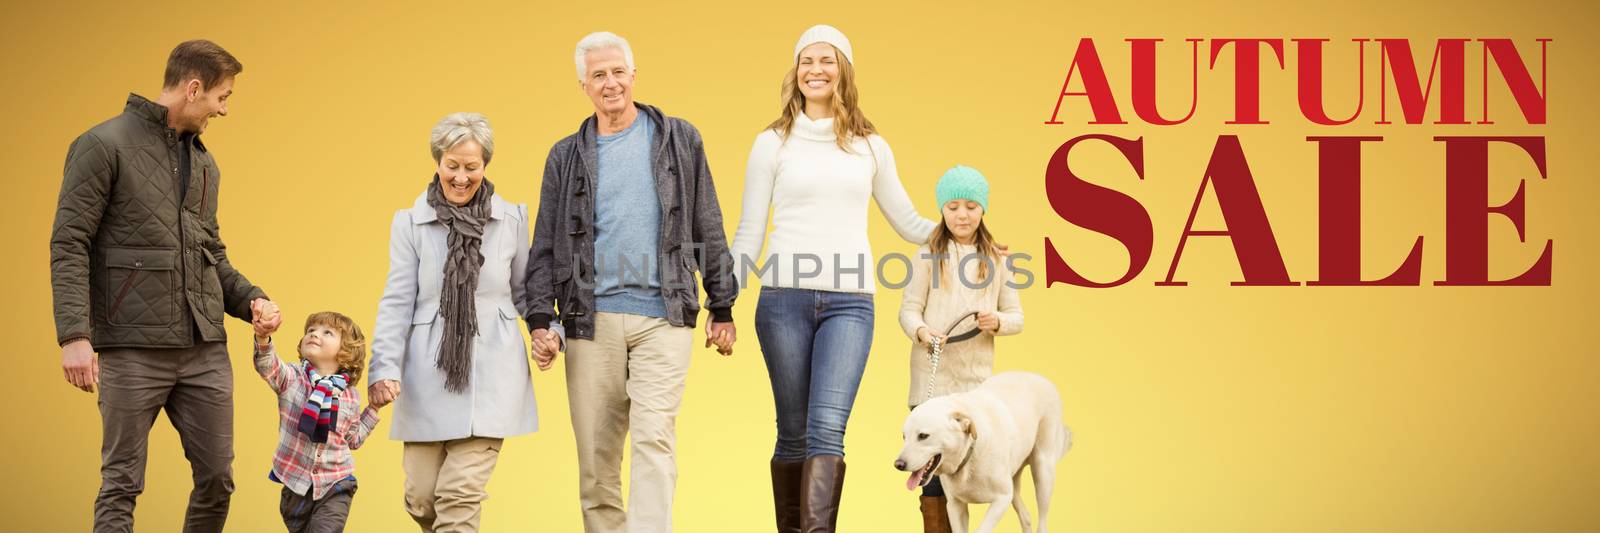 Happy family walking with their dog against abstract yellow background